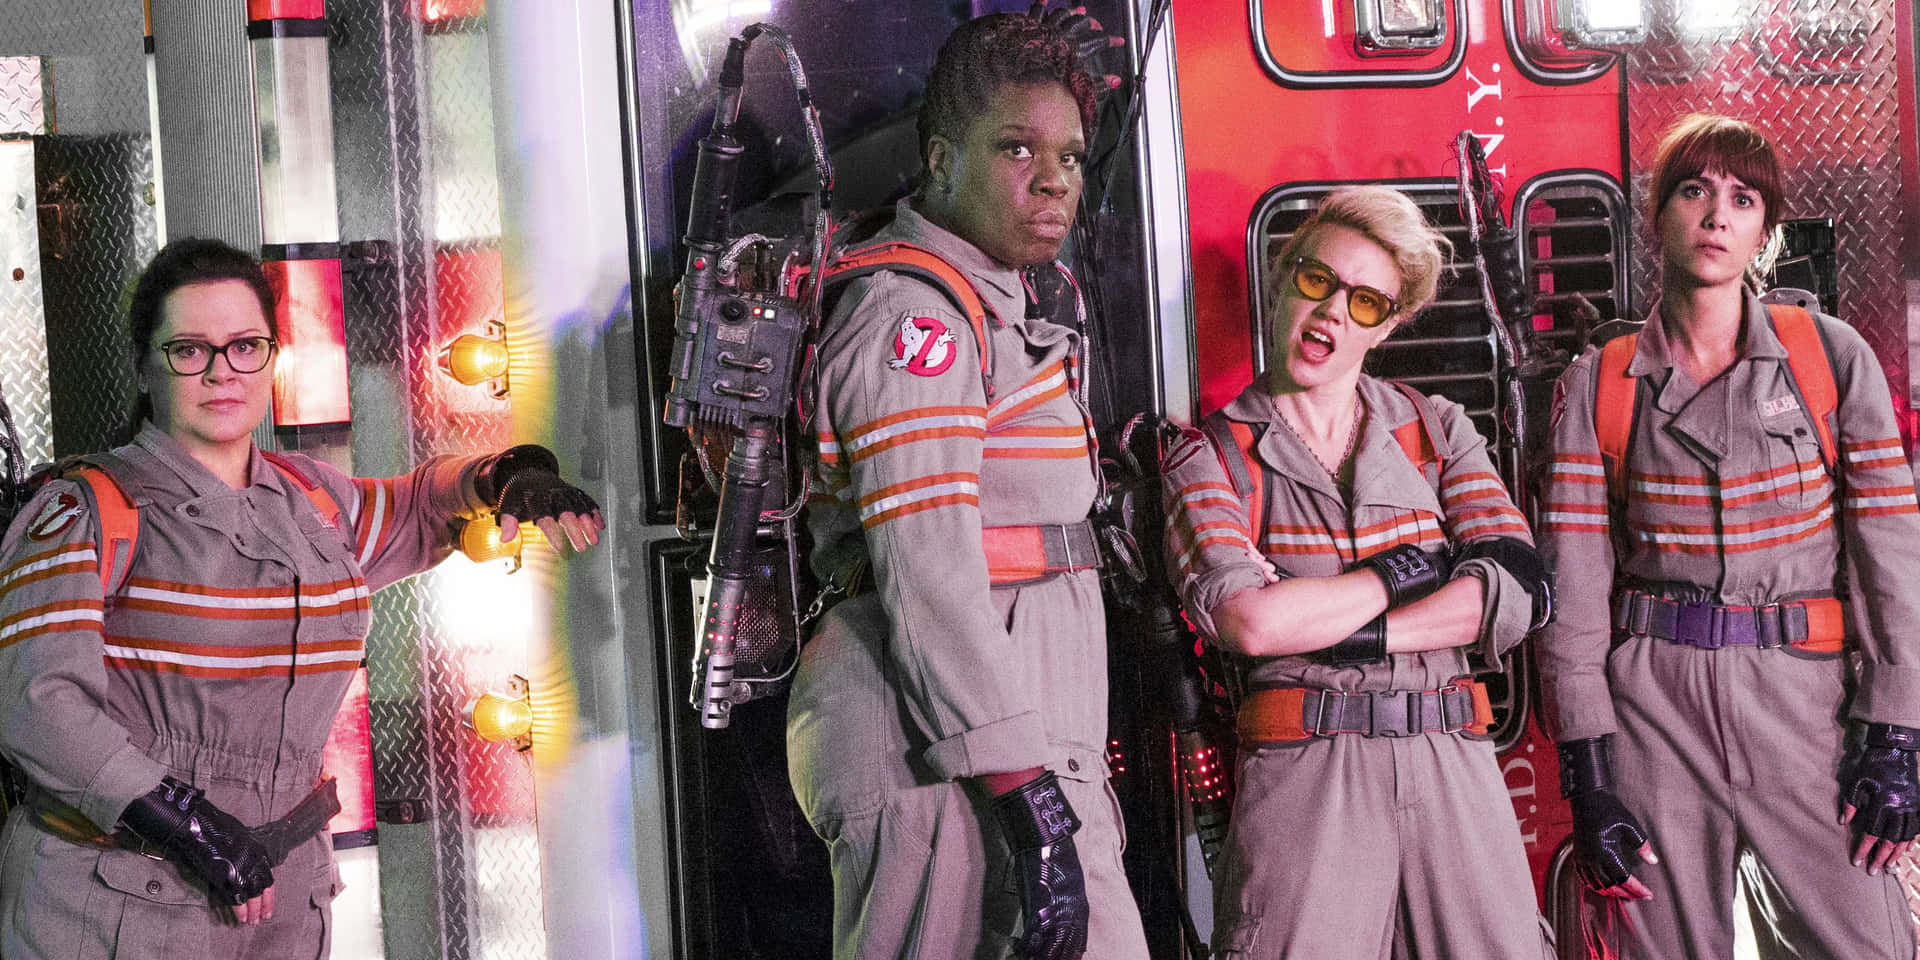 Ghostbusters crew ready for action